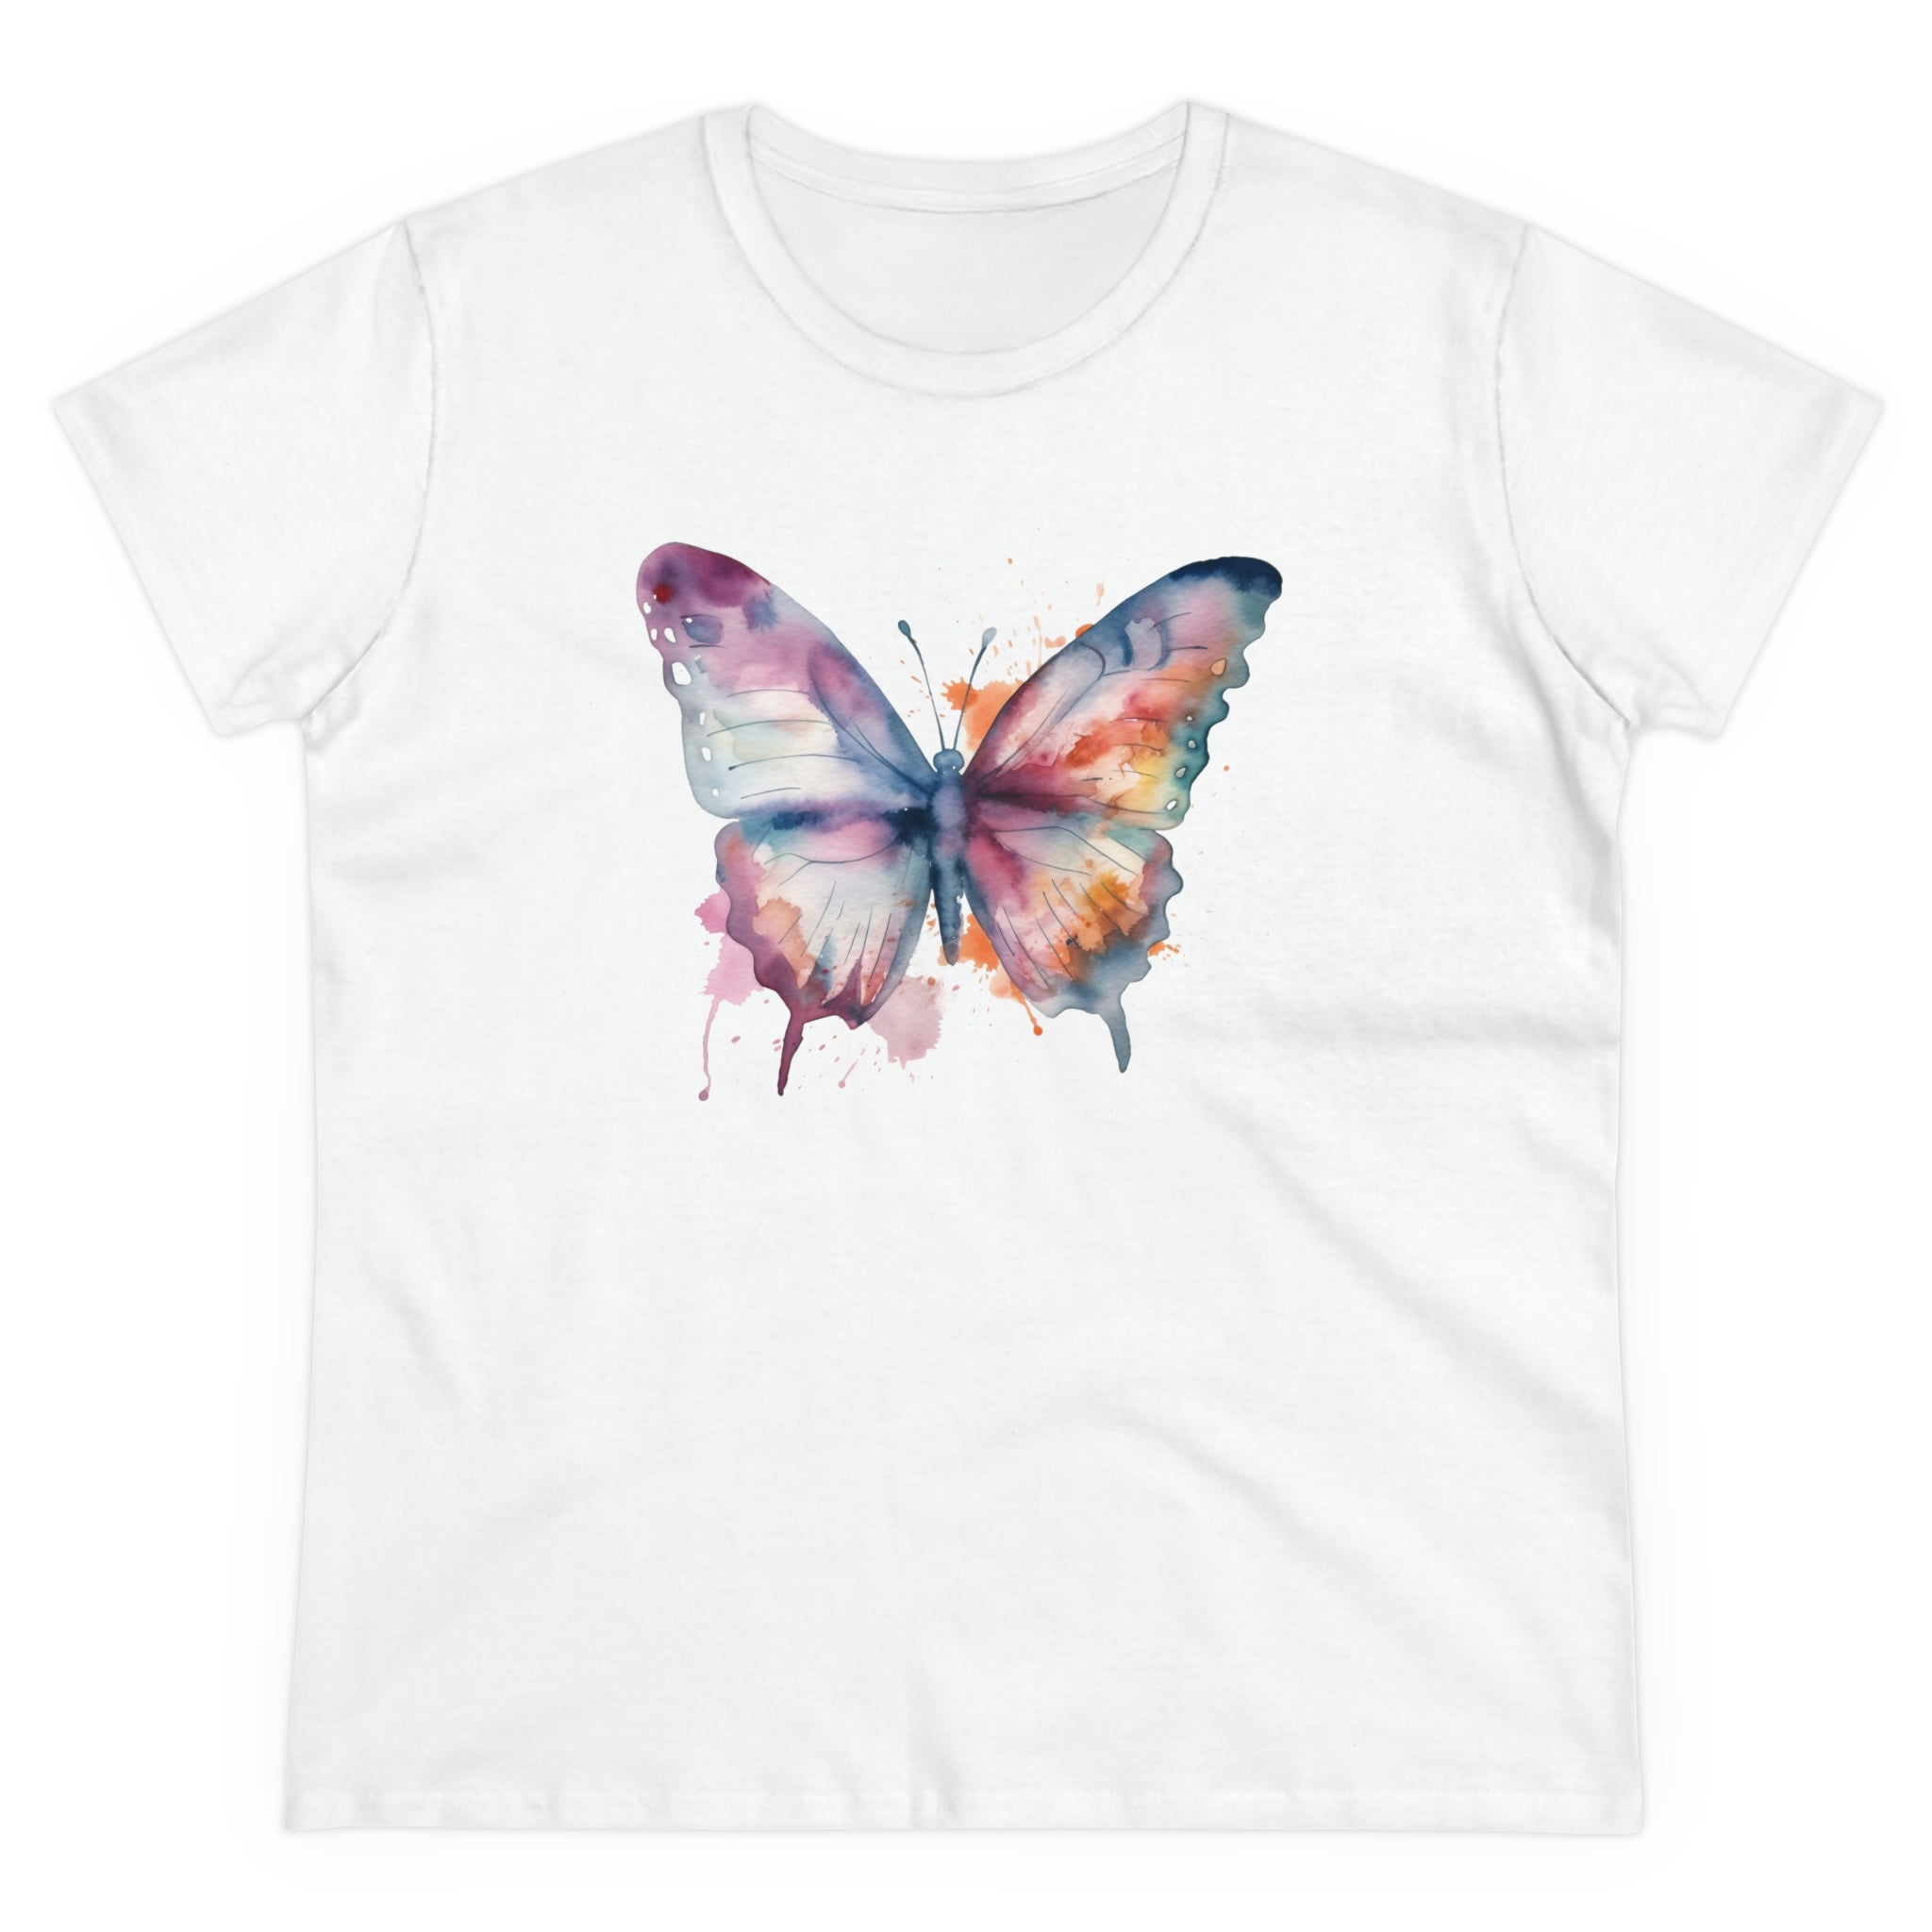 Whimsical Butterfly T-Shirt - A Beautiful and Unique Piece of Art for Your Wardrobe